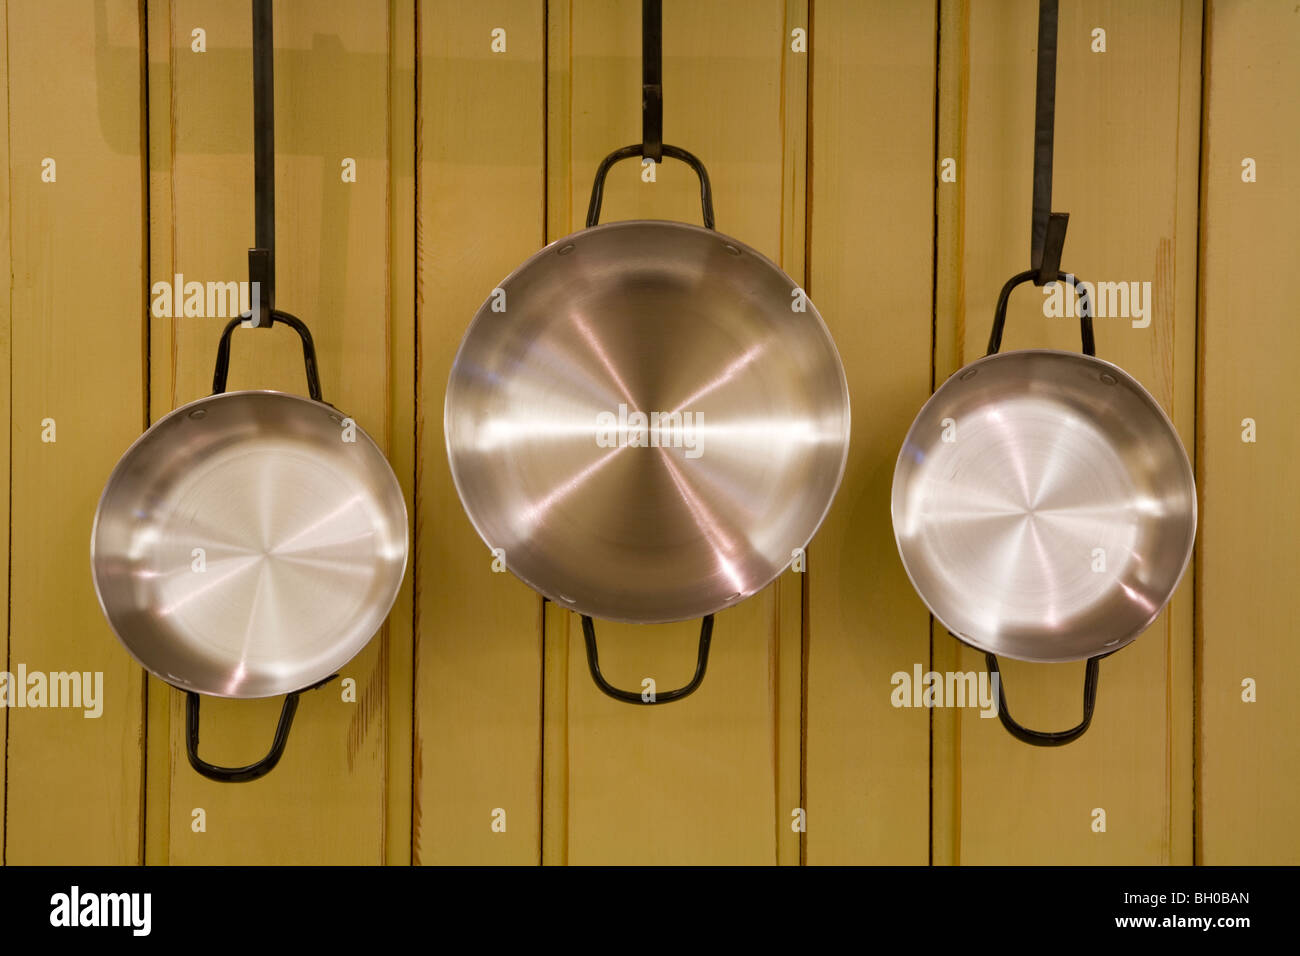 Three frying pans casseroles griddles poachers hanging from metal grips in front of yellow wooden wall in kitchen Stock Photo